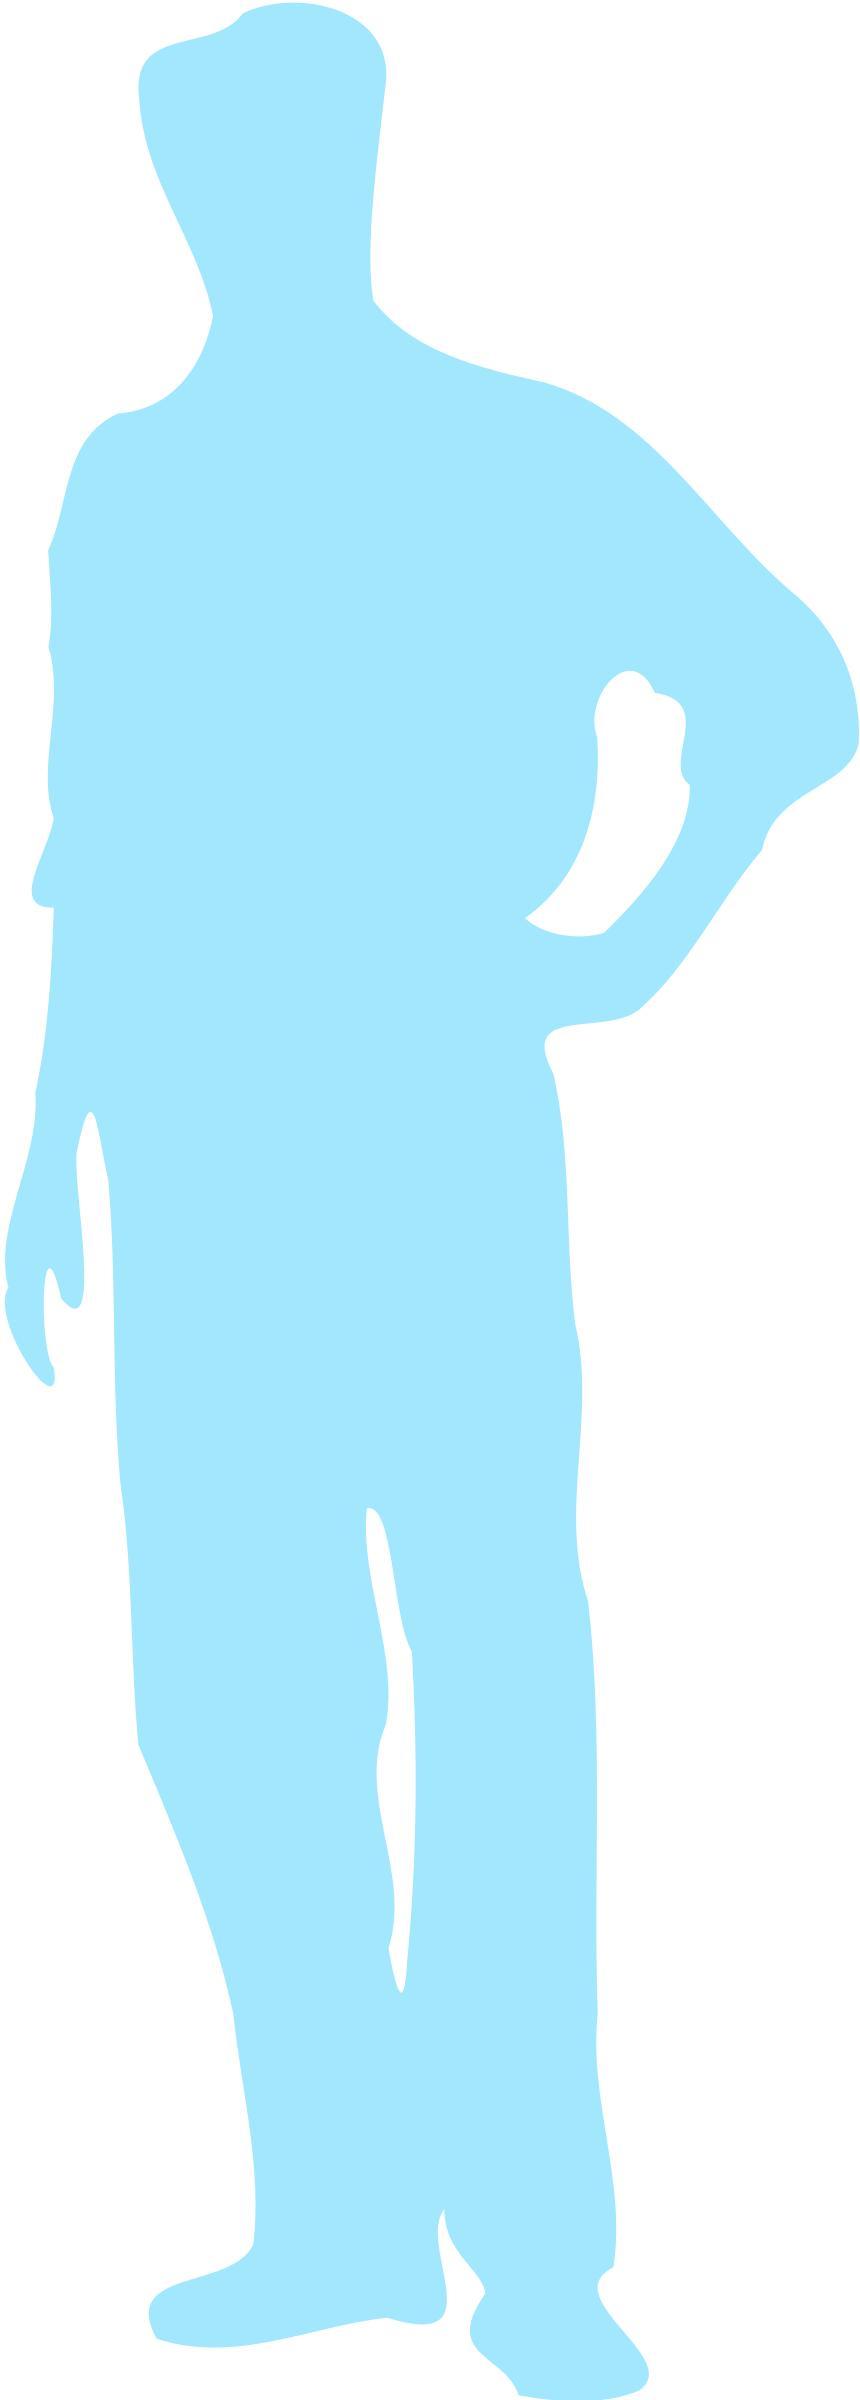 Silhouette Homme 01 png transparent